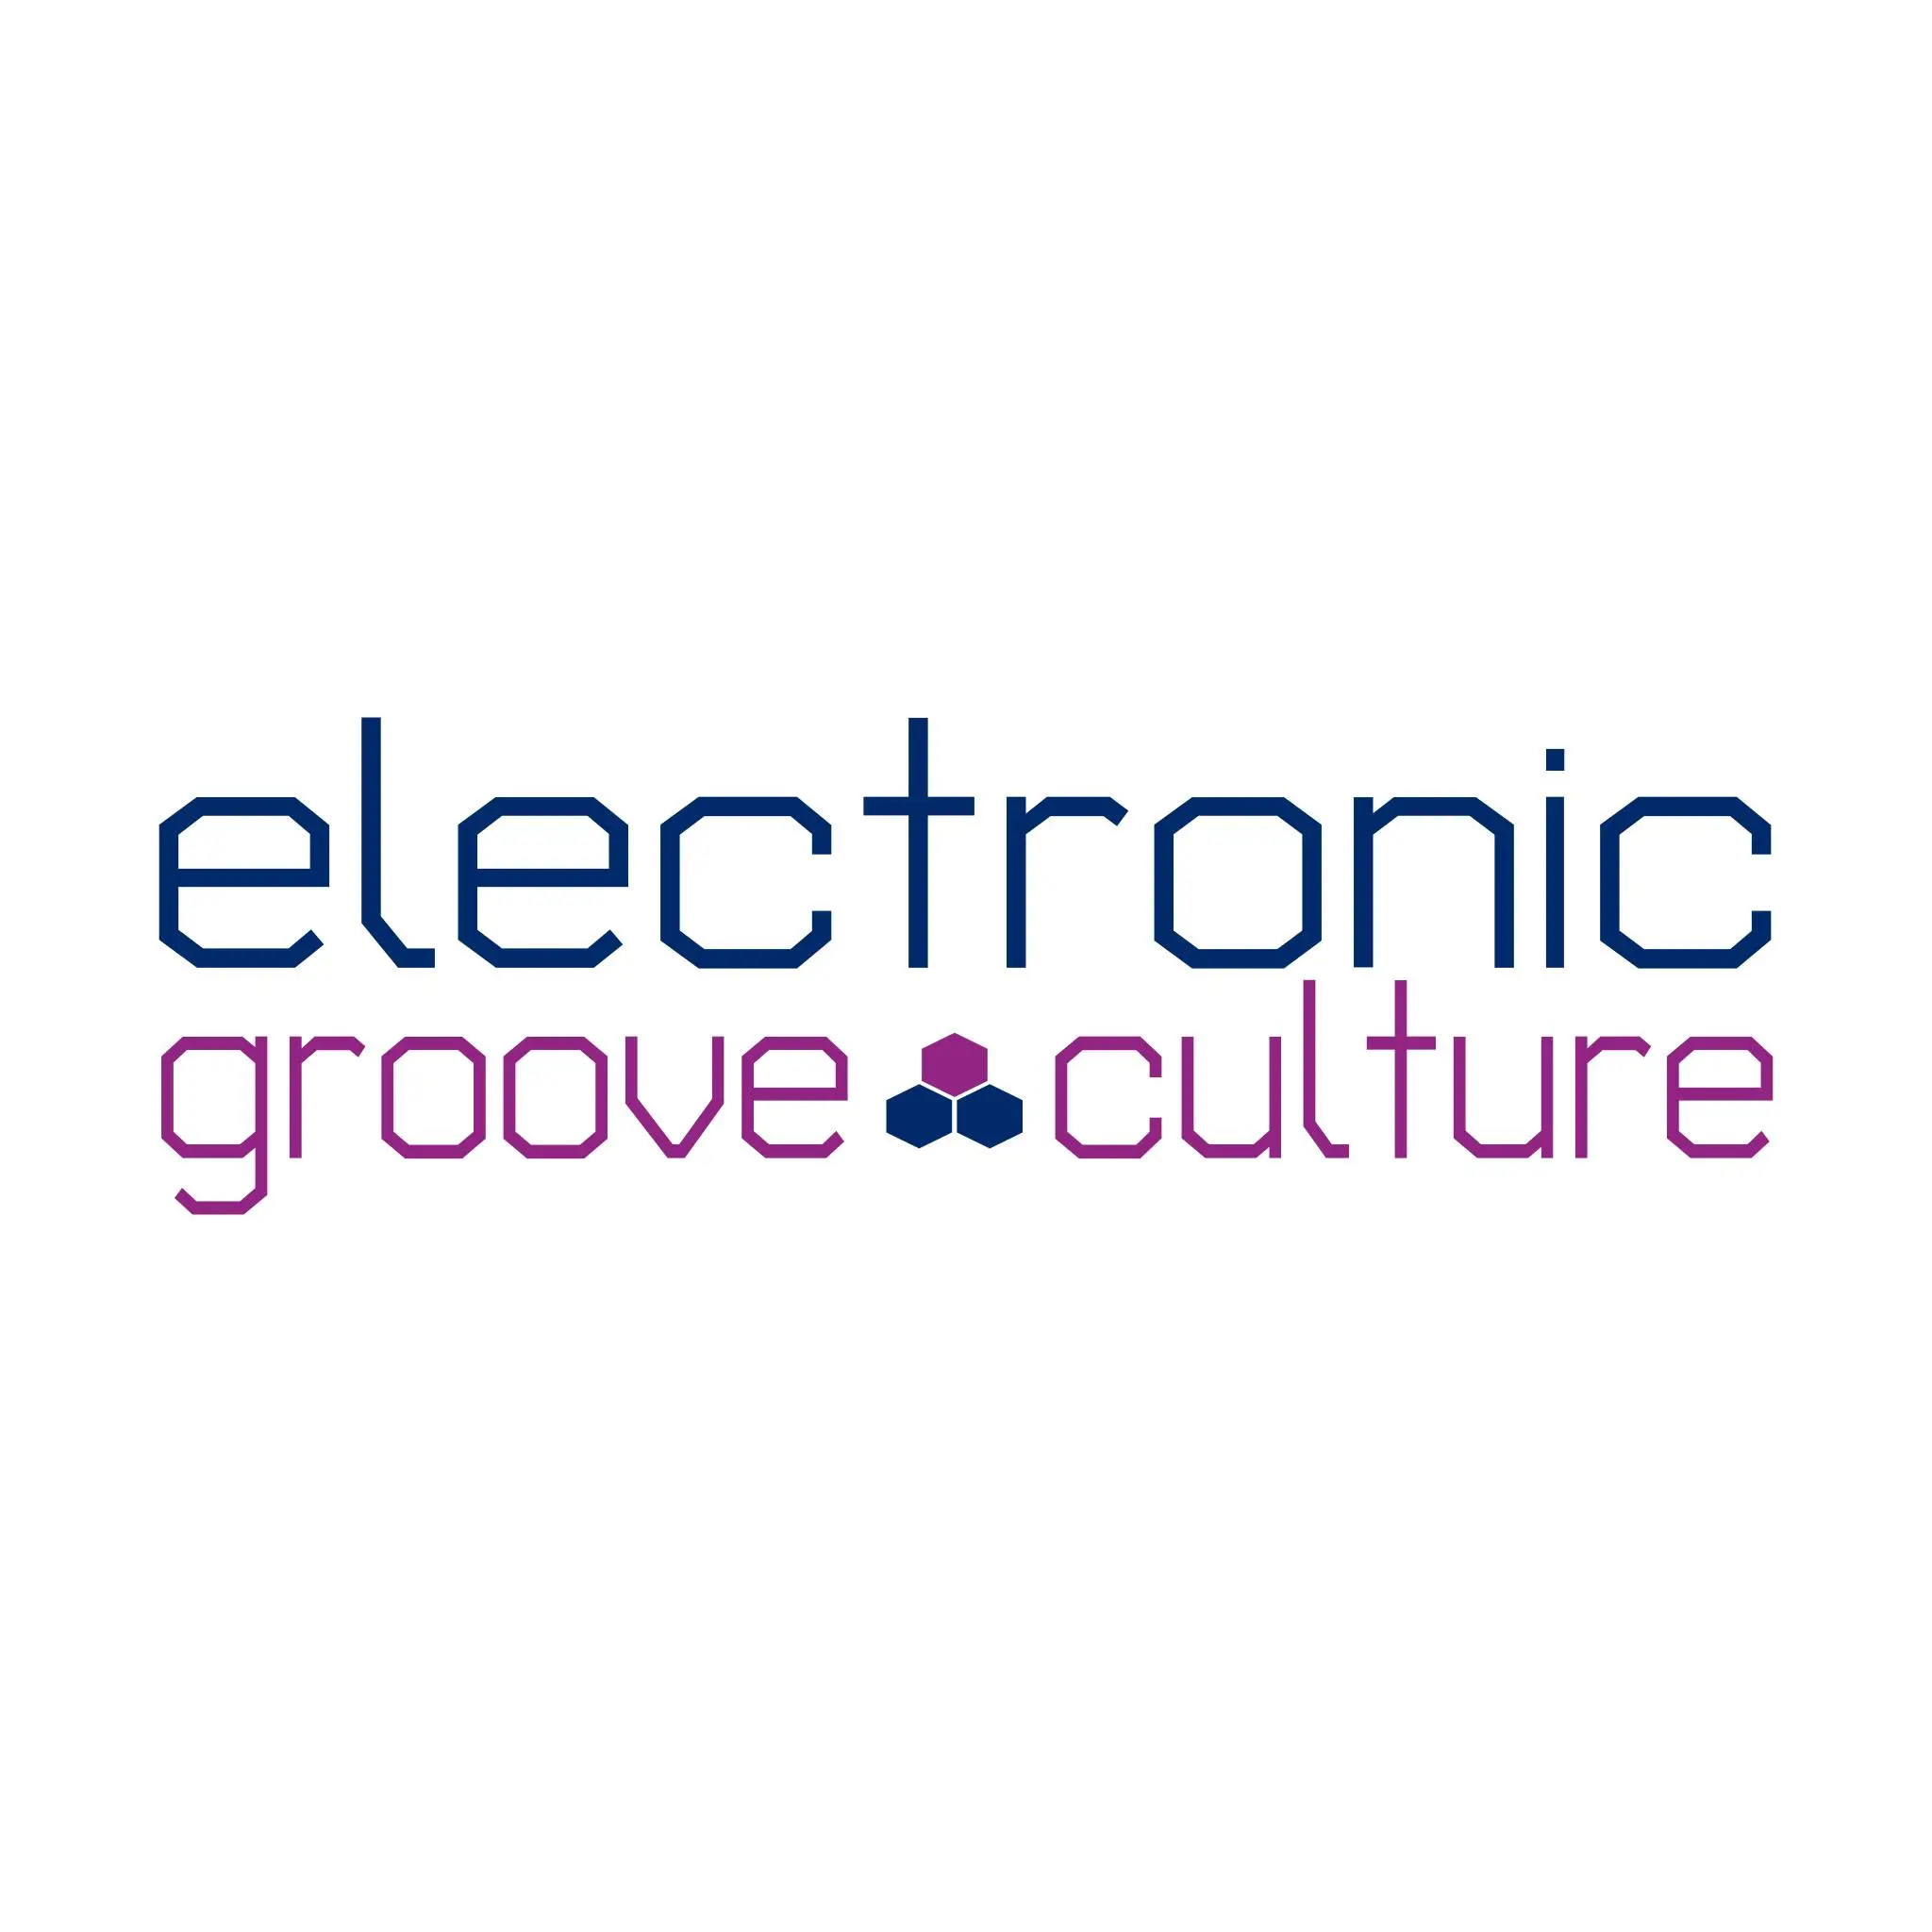 Advertising: electronic groove culture